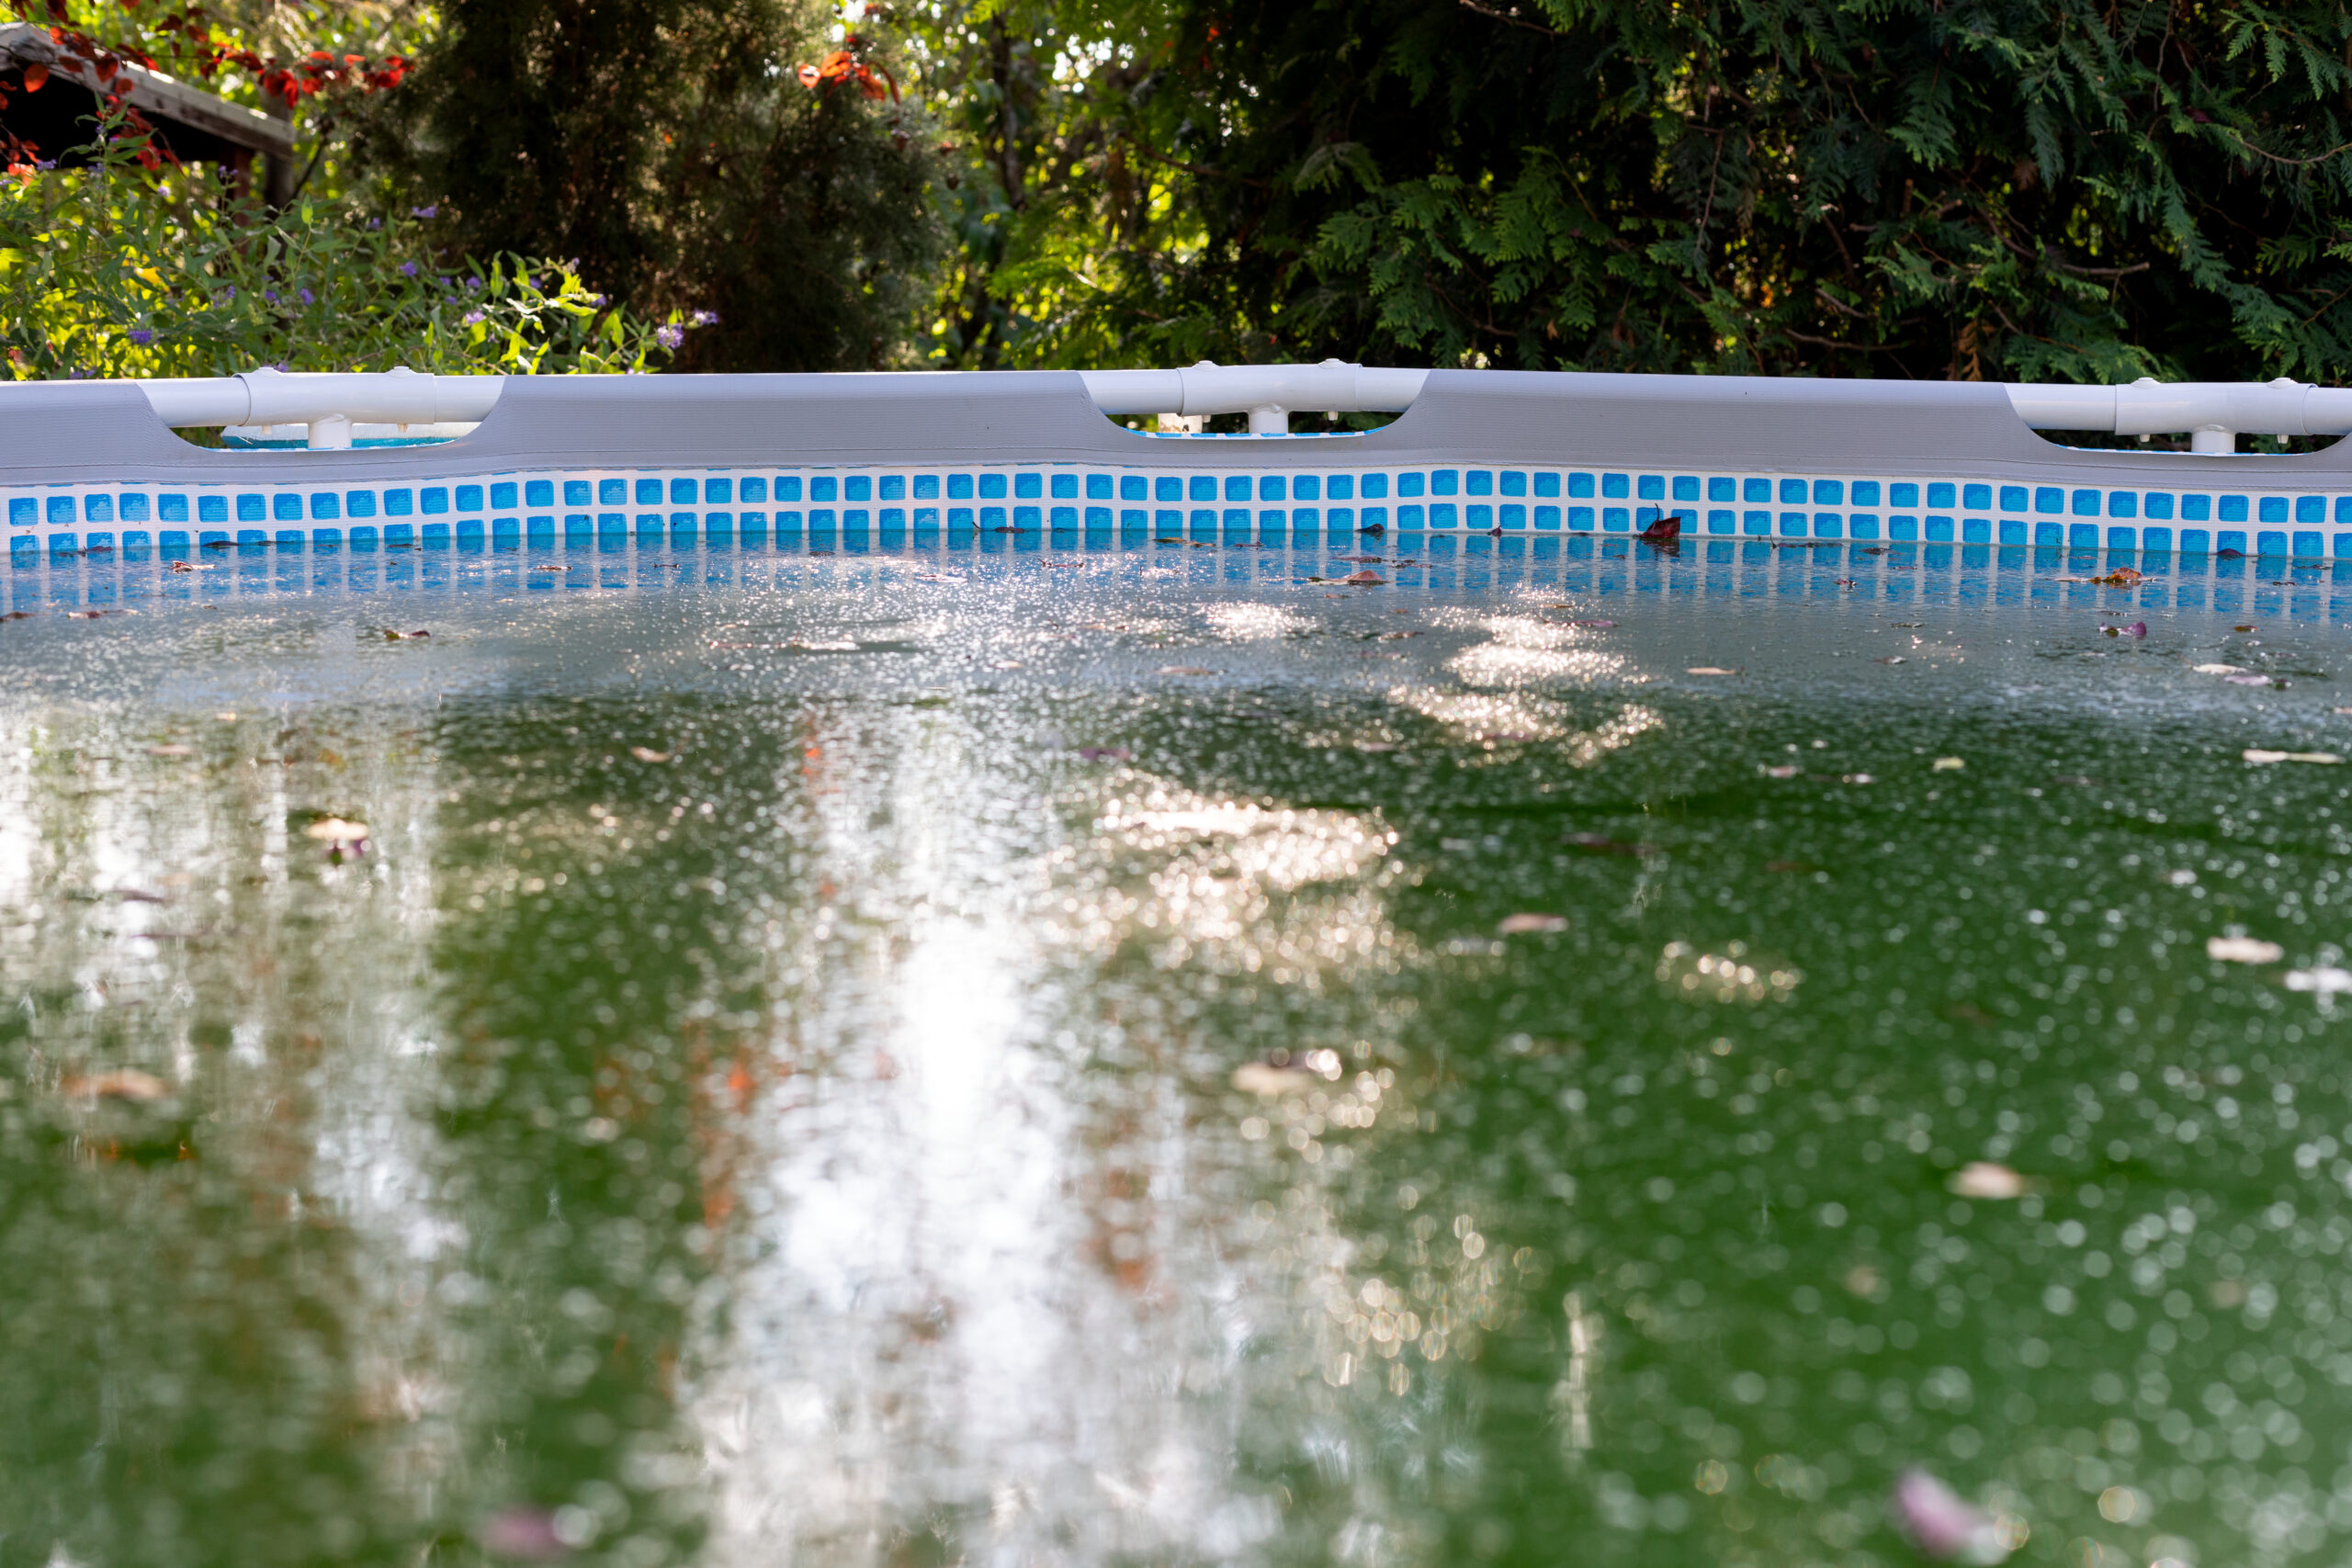 A dirty pool covered in leaves and overrun with algae, requiring thorough cleaning and maintenance.